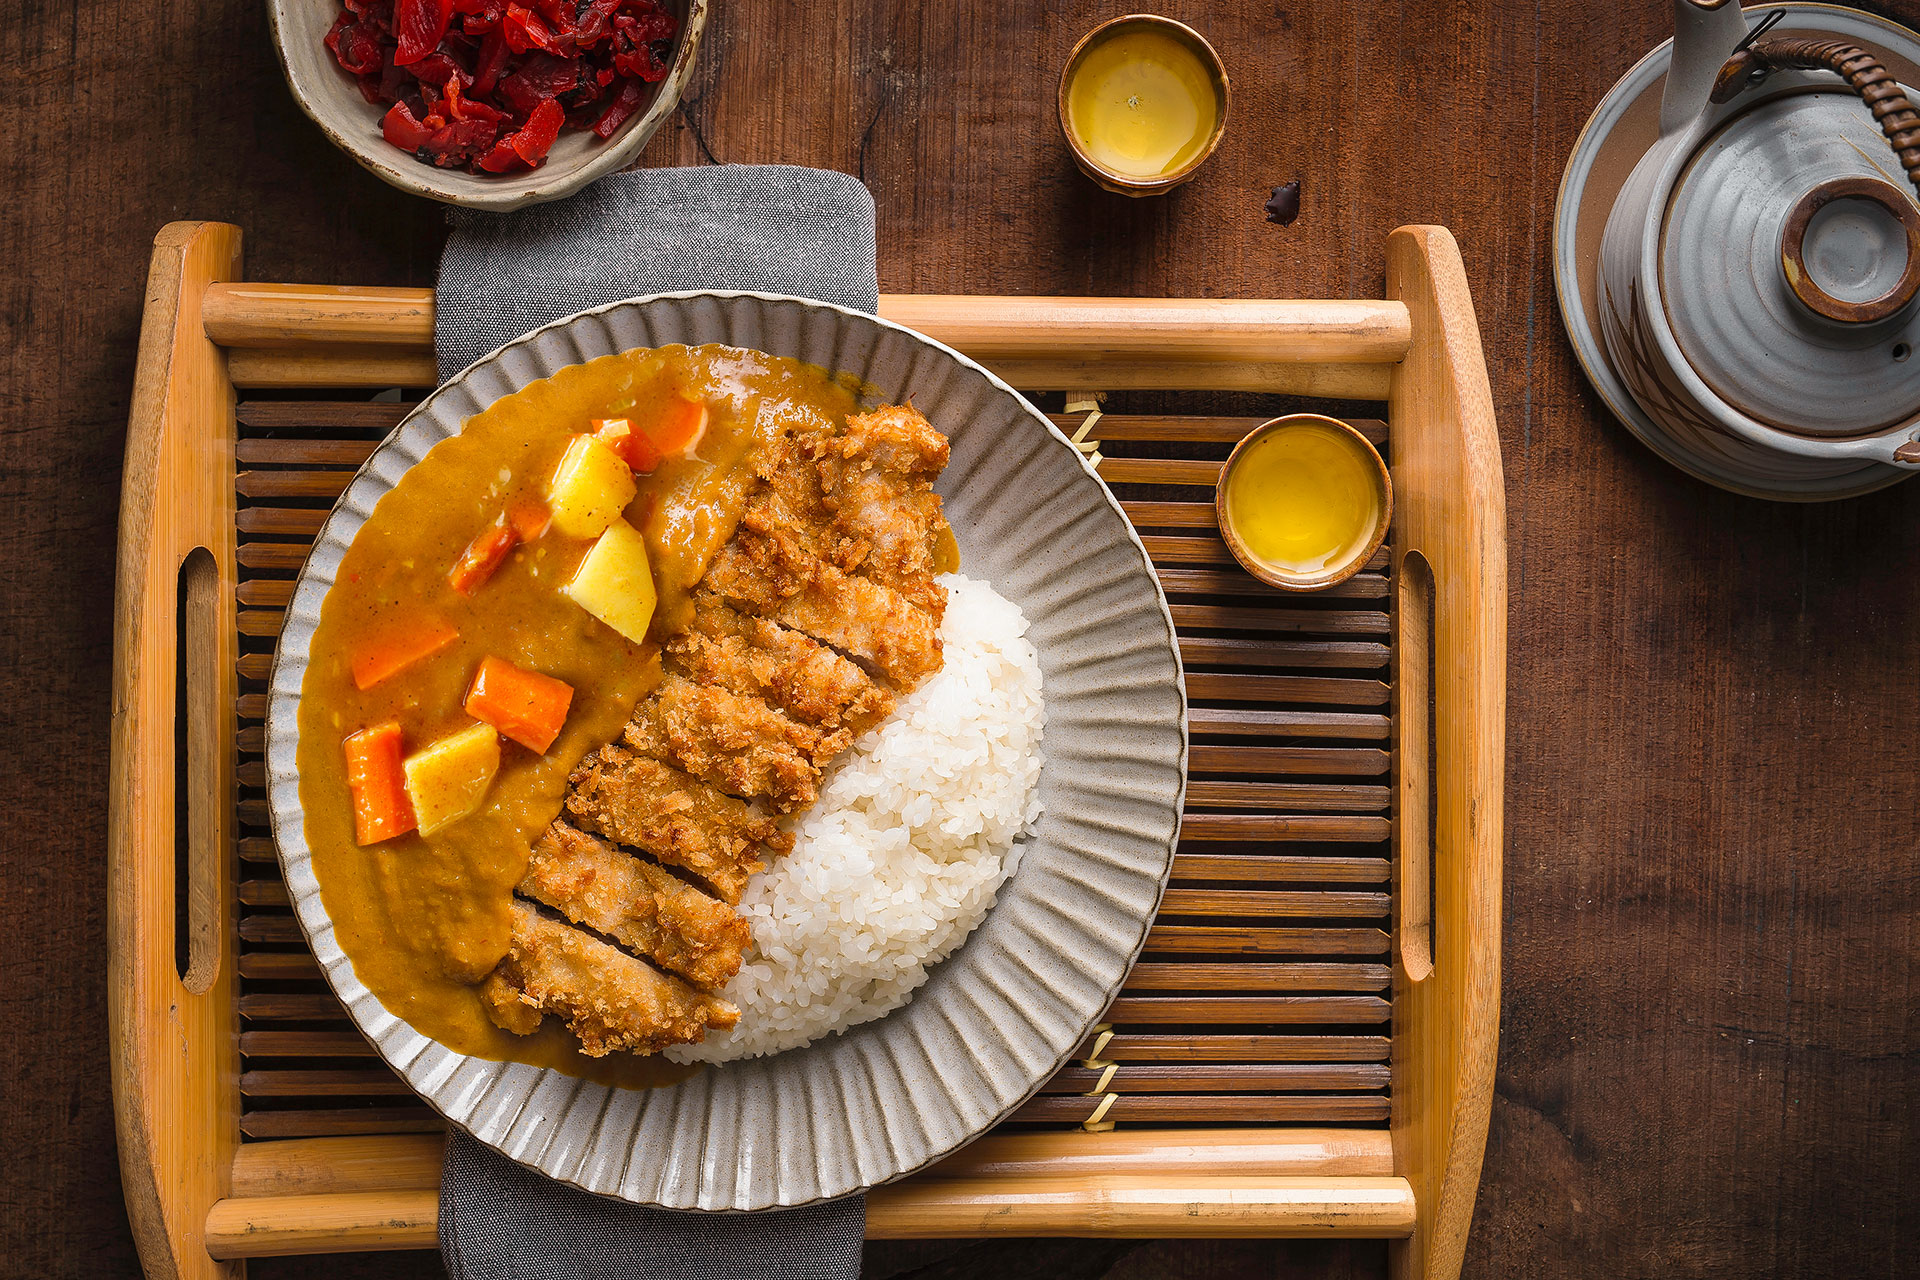 Japanese Curry - The Typical National and Family Dish